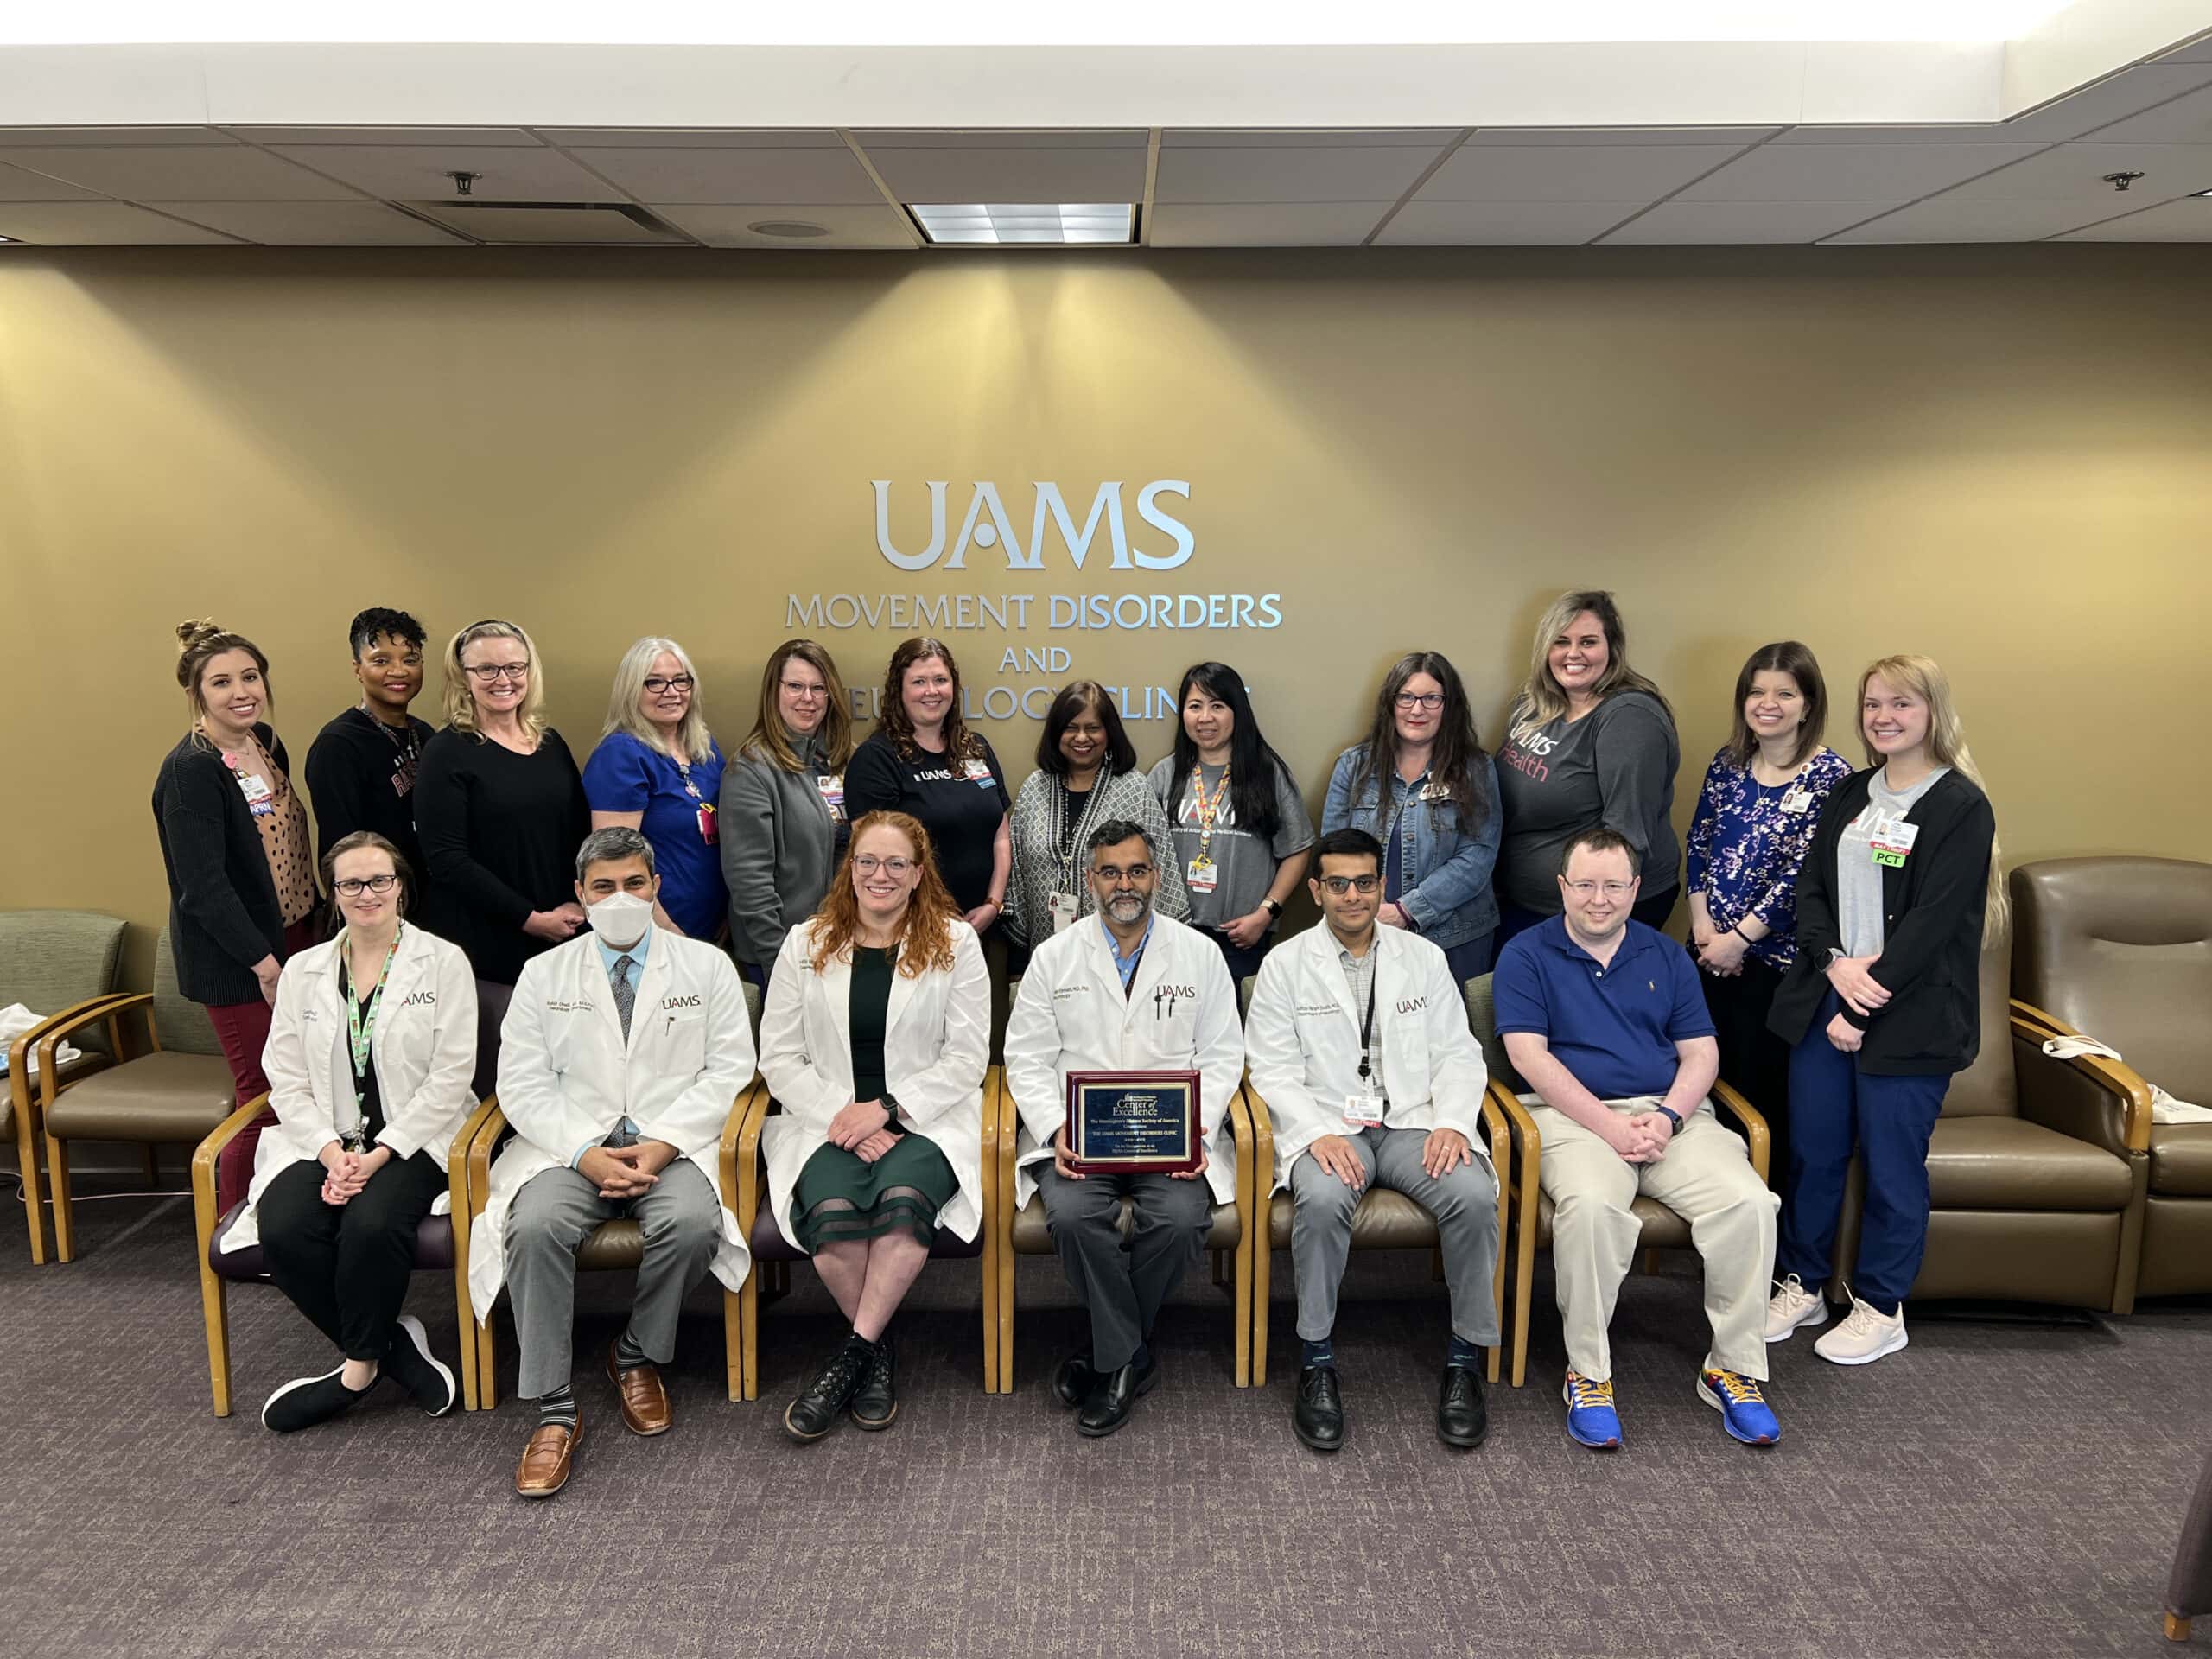 Members of the UAMS Movement Disorders Team